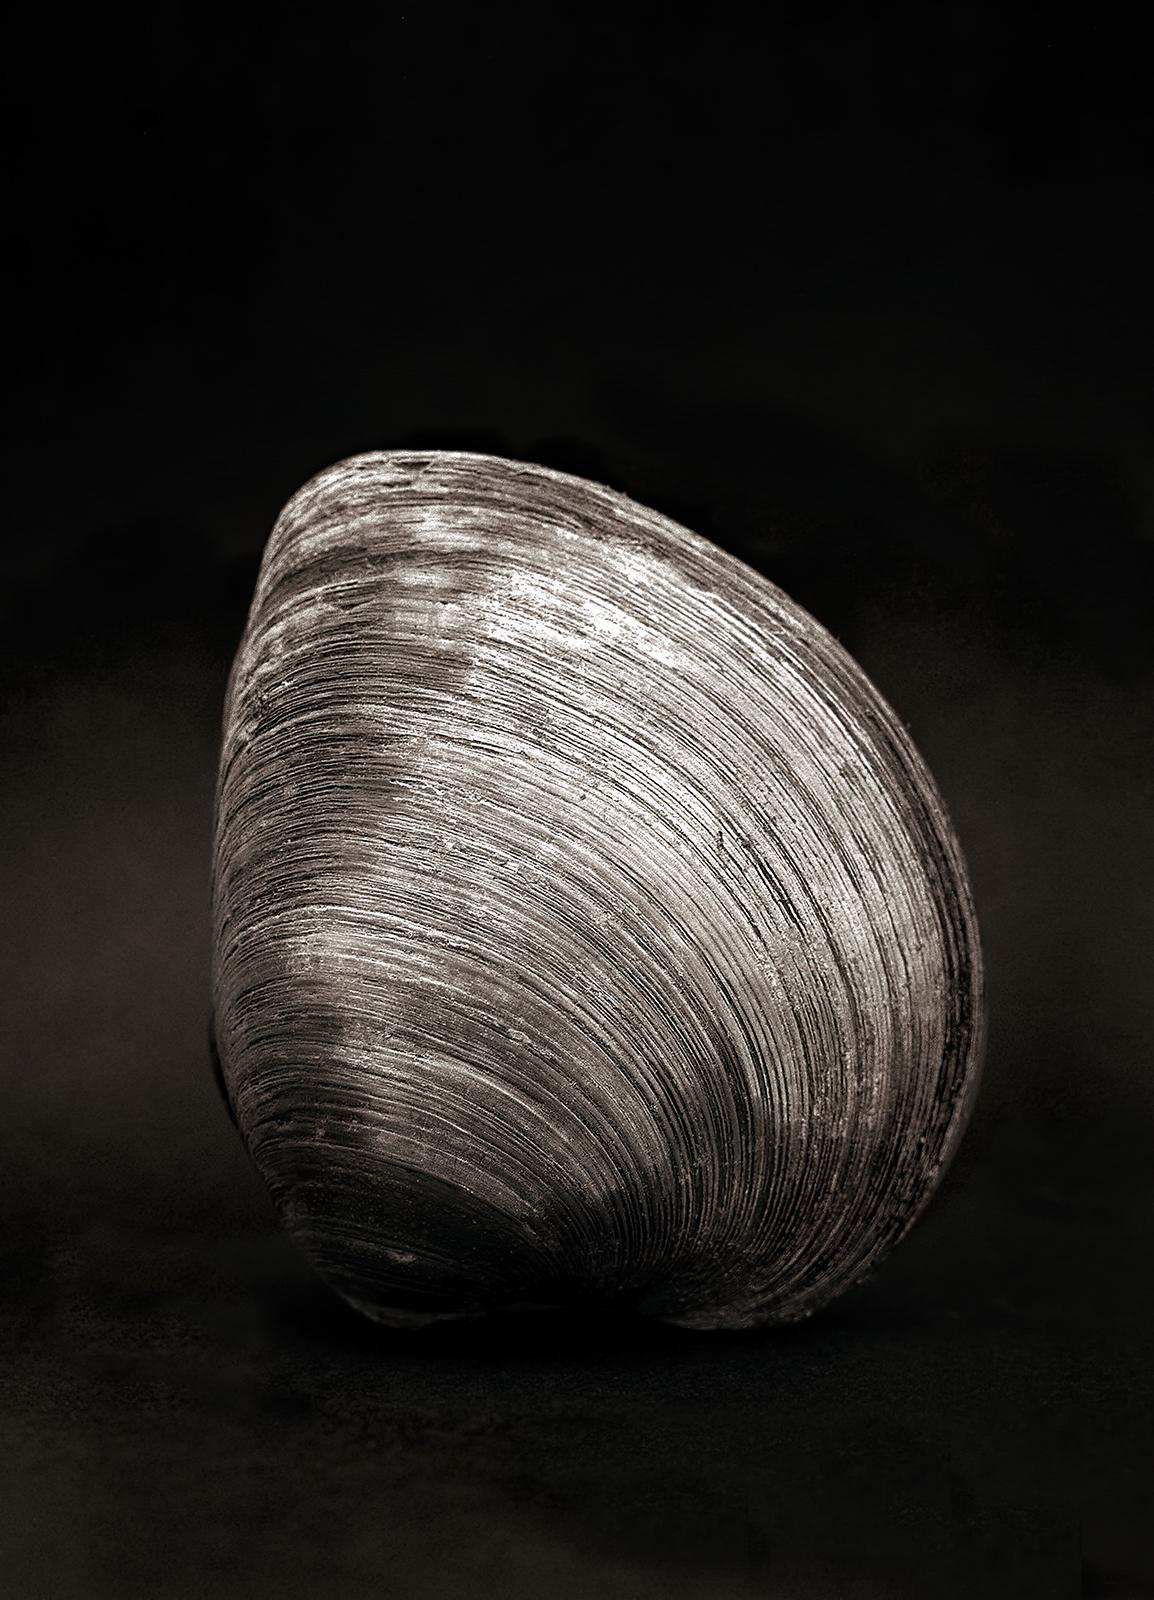 Clam -  Signed limited edition archival pigment print,  Sepia tone  -   Edition of 5

This image was captured on film in 1984. 
The negative was scanned creating a digital file which was then printed on Hahnemühle Photo Rag® Baryta 315 gsm